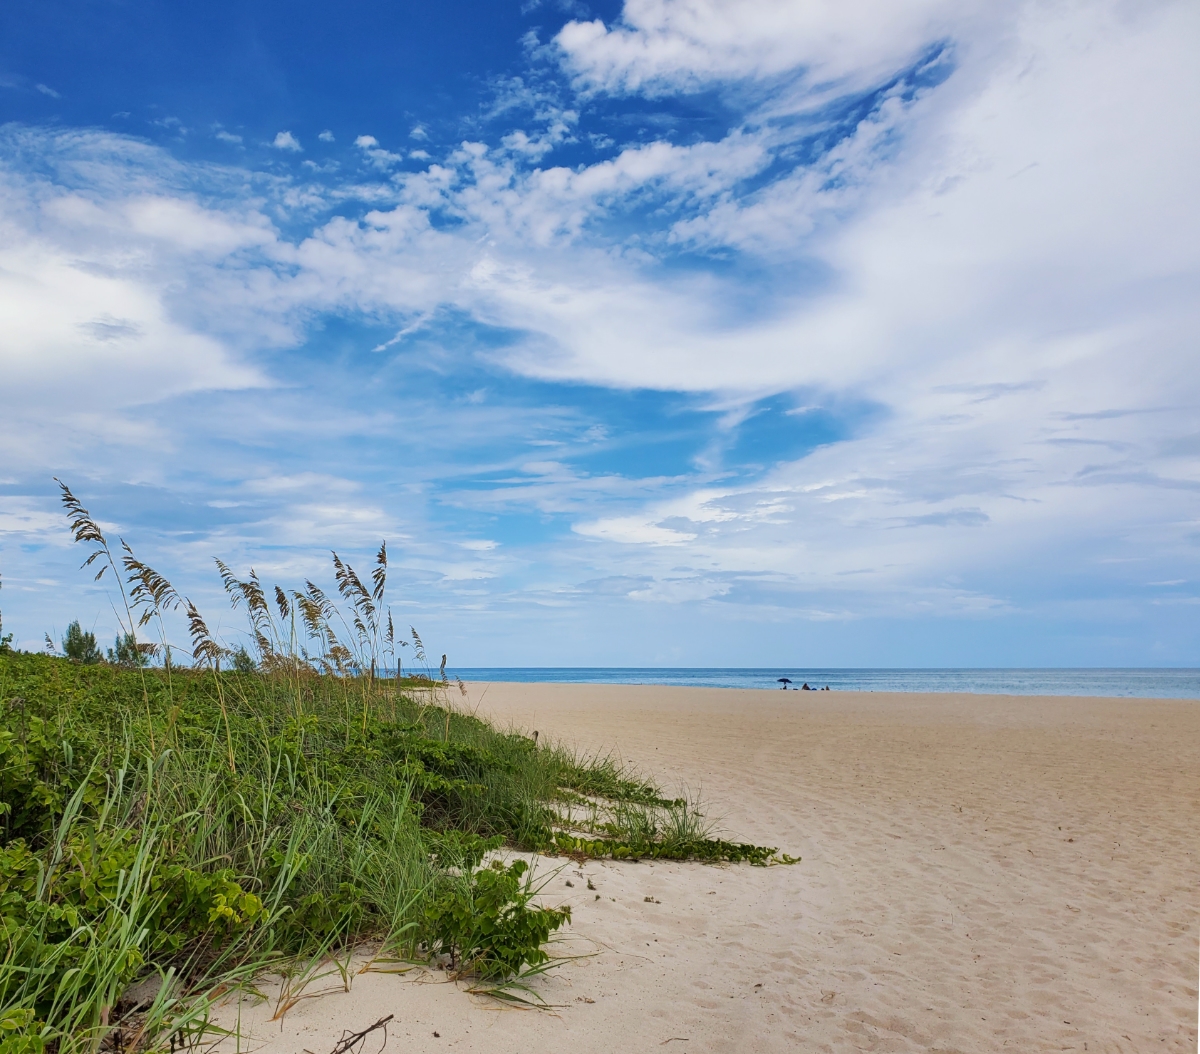 South Beach in Vero Beach is a particularly wide and uncrowded swath of coastline